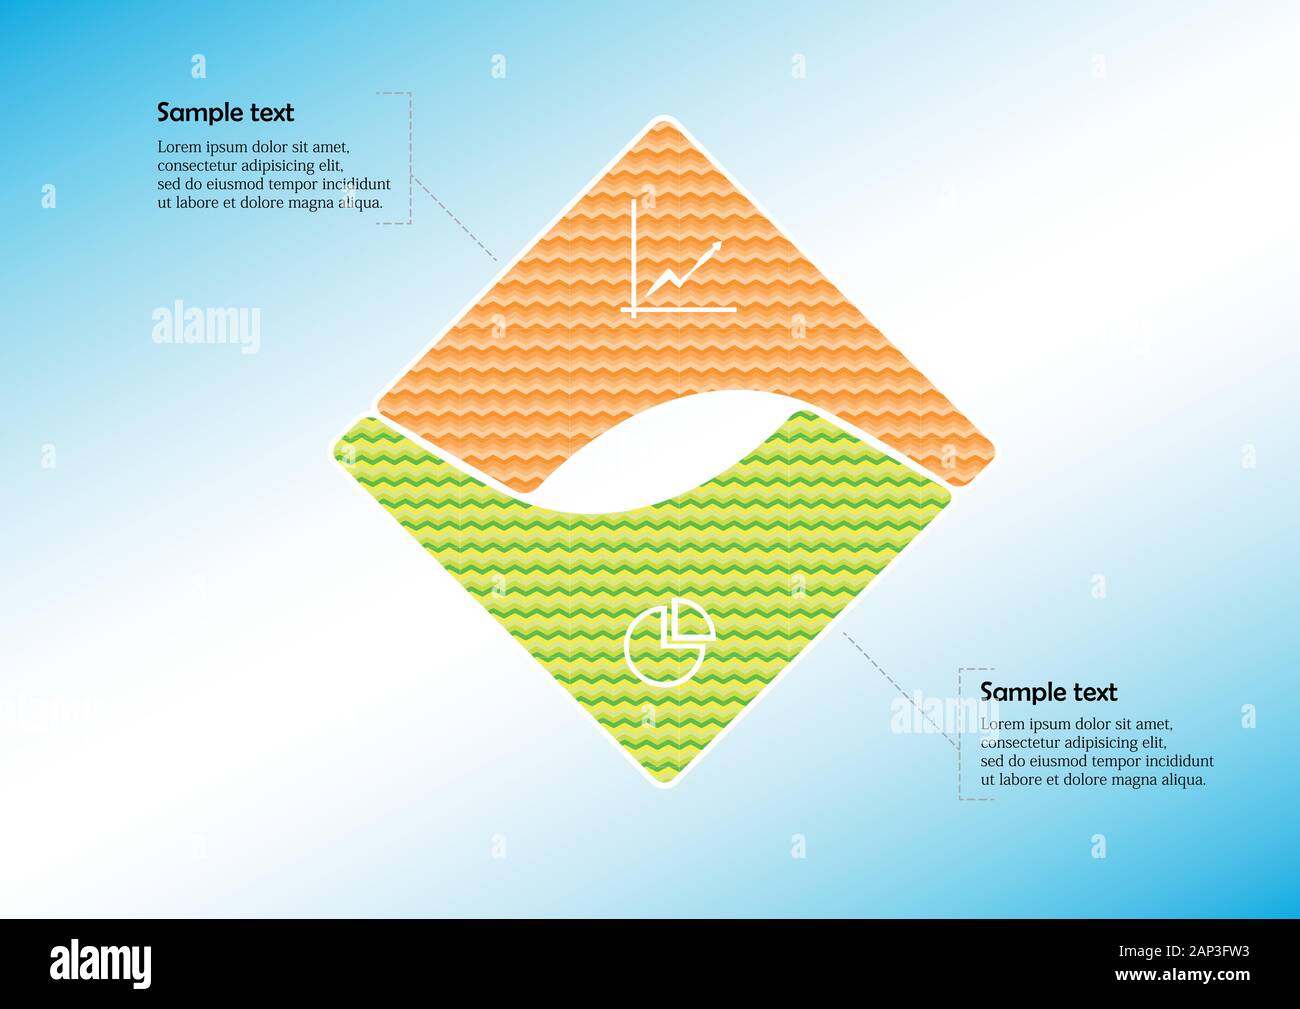 Infographic vector template with shape of square. Graphic is divided to two curved color parts filled by patterns. Each section is joined with simple Stock Vector